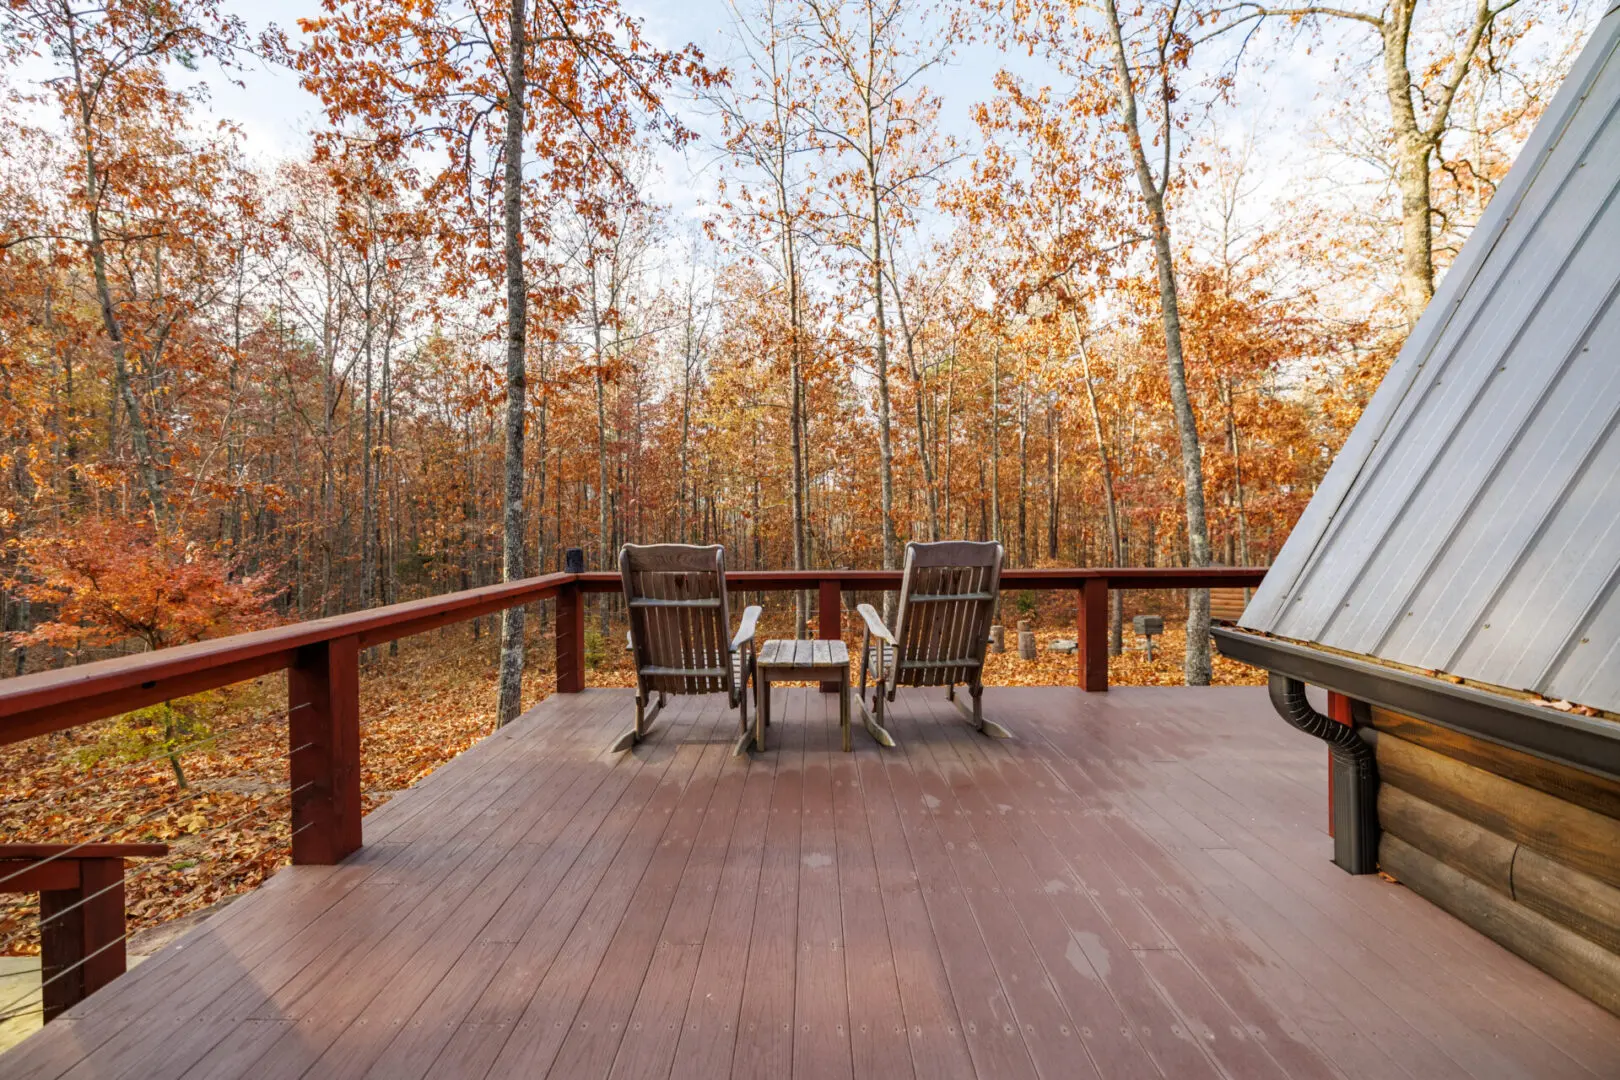 The deck of a Little River cabin in the woods.